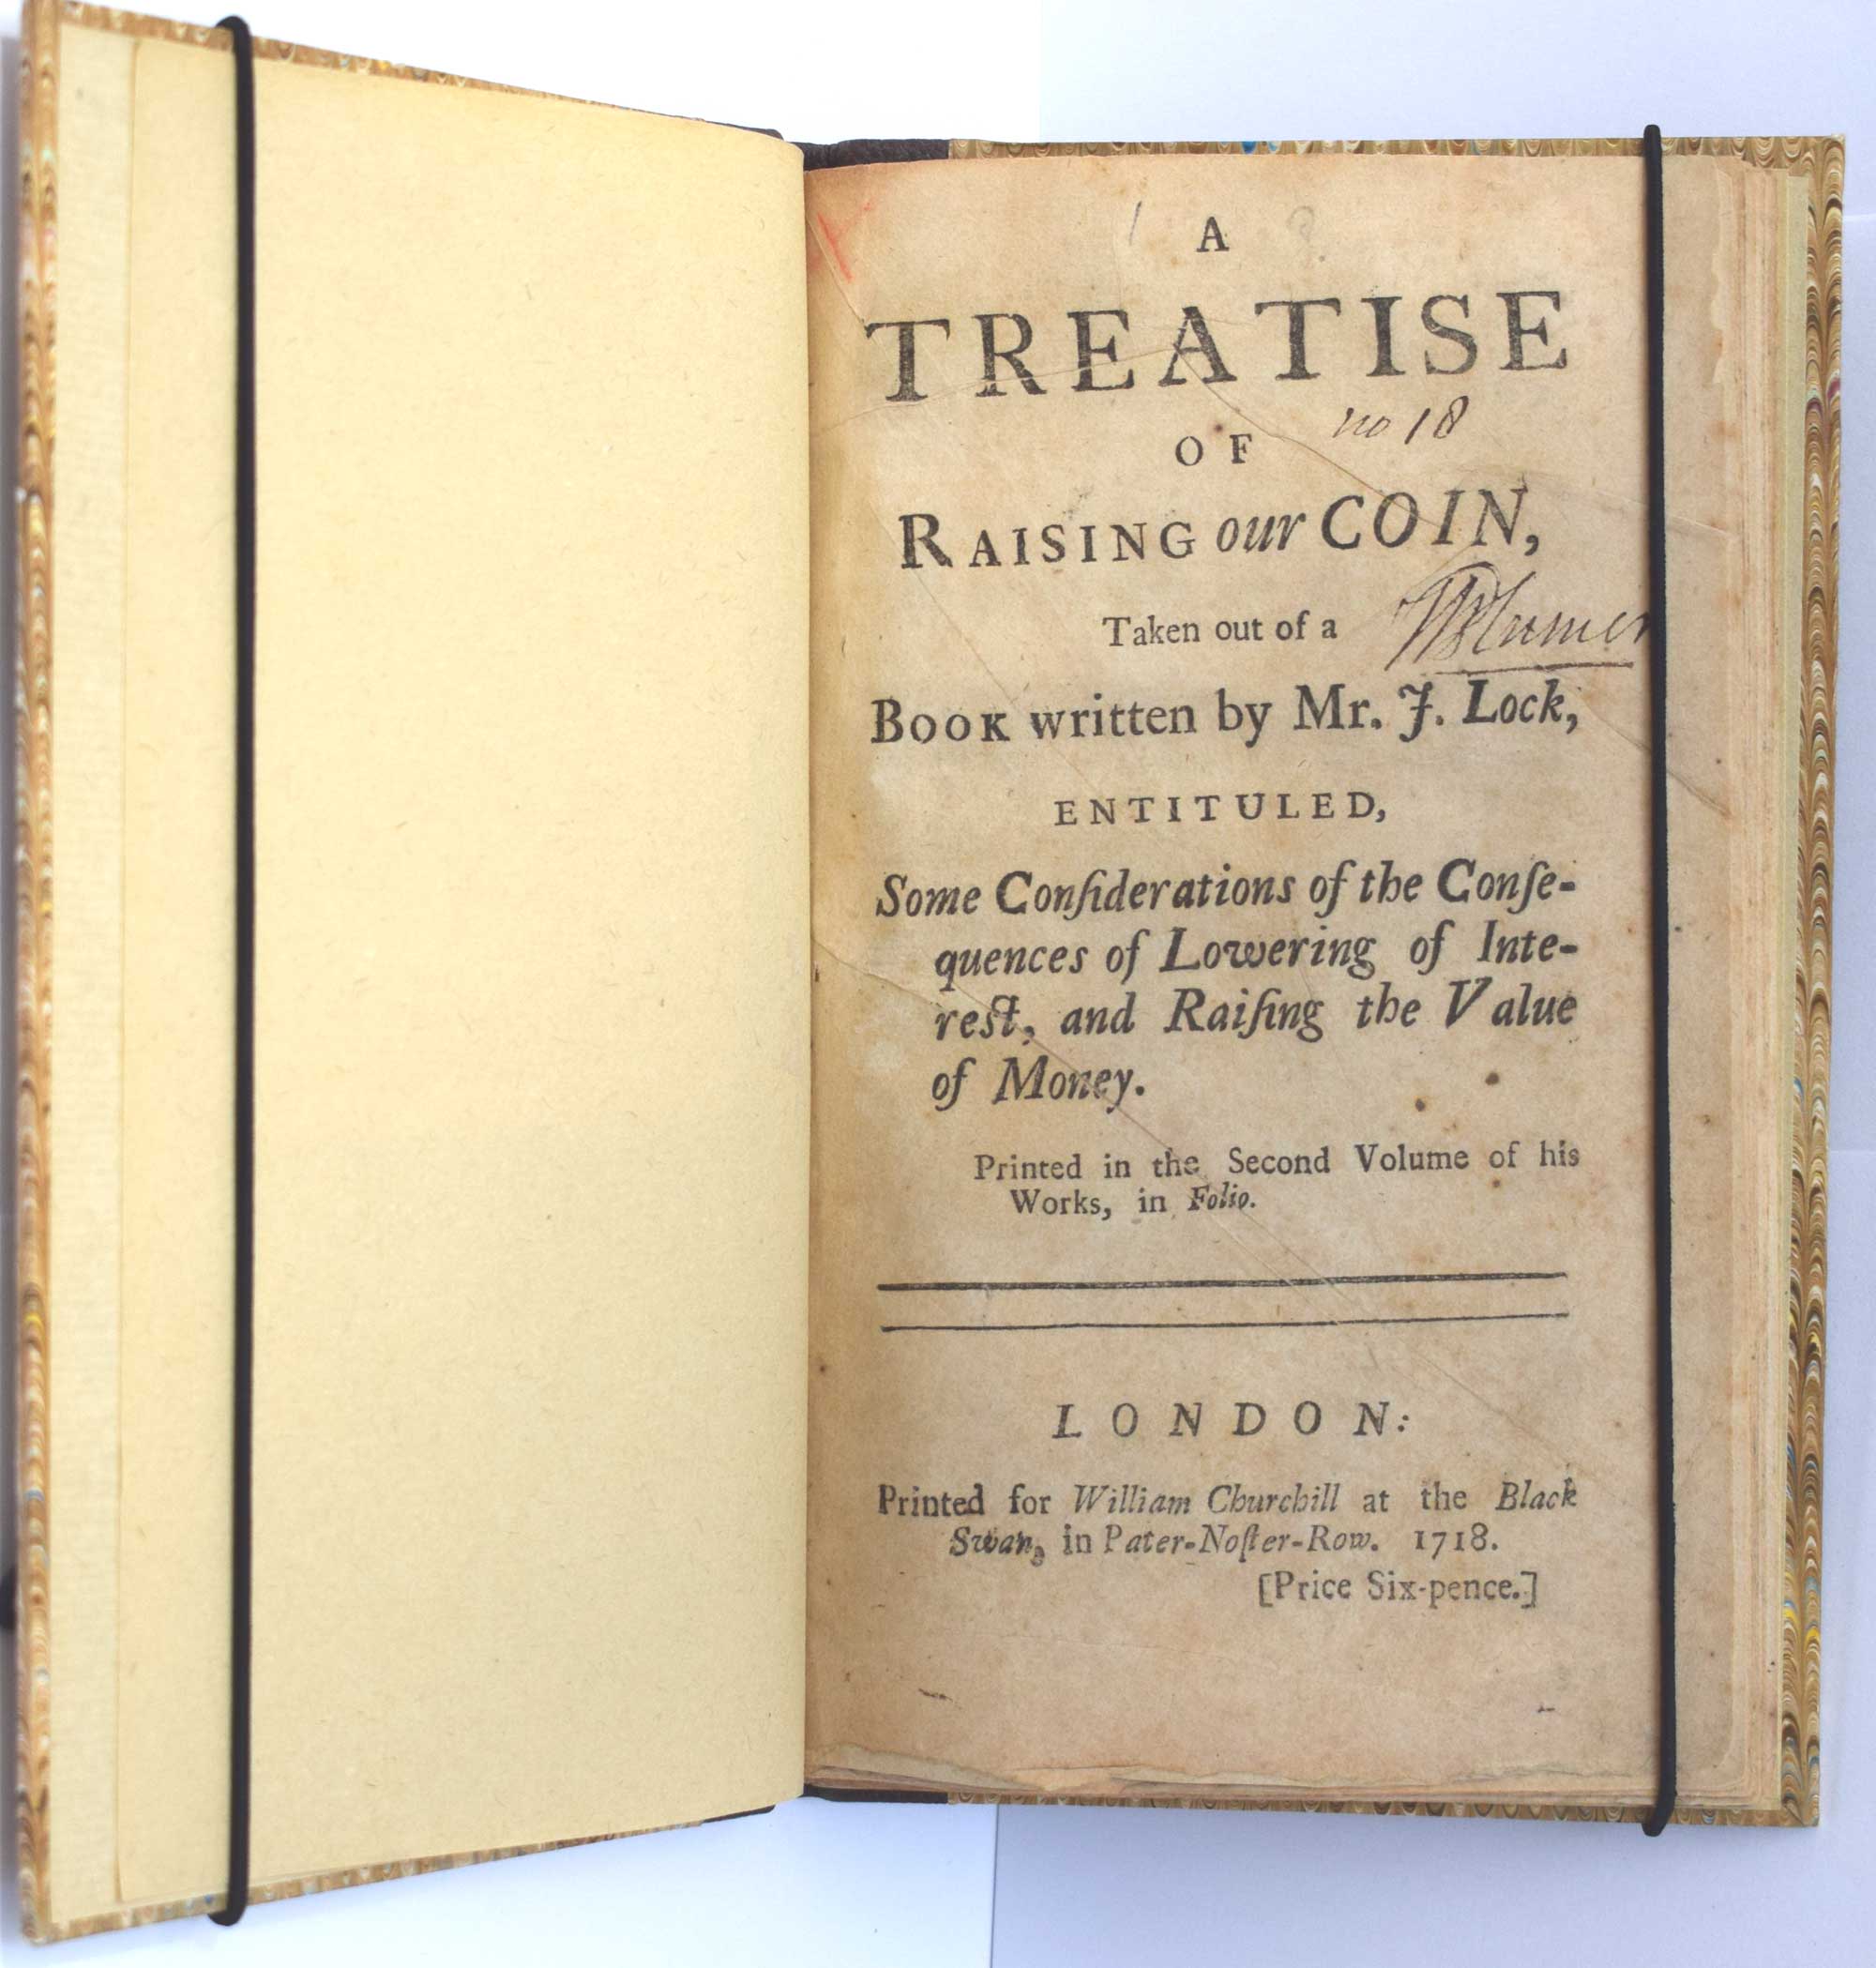 A Treatise of Raising Our Coin, Taken Out of a Book Written by Mr J. Locke, Entitled Some Considerations of the Consequences of Lowering of Interest, and Raising the Value of Money.